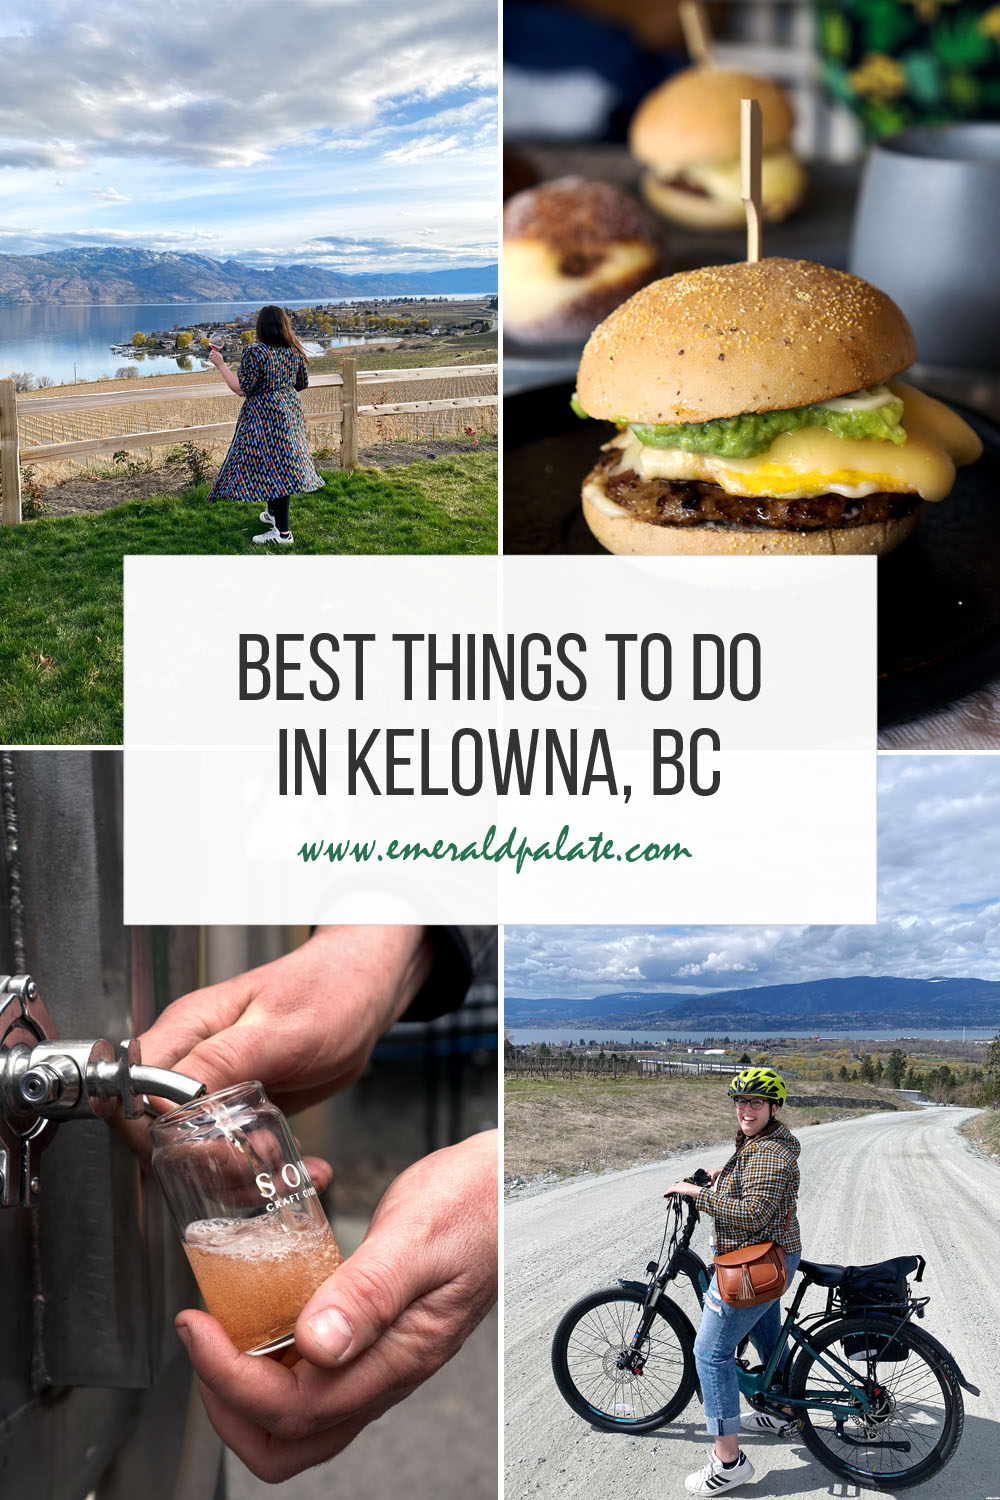 The perfect weekend itinerary in Kelowna, British Columbia. From Kelowna wineries to Kelowna restaurants and Kelowna activities, here are all the fun things to do in Kelowna BC regardless of if you have one day in Kelowna, 2 days in Kelowna, or only a weekend in Kelowna! This Kelowna BC itinerary would also make the perfect Kelowna girls weekend or Kelowna bachelorette itinerary!